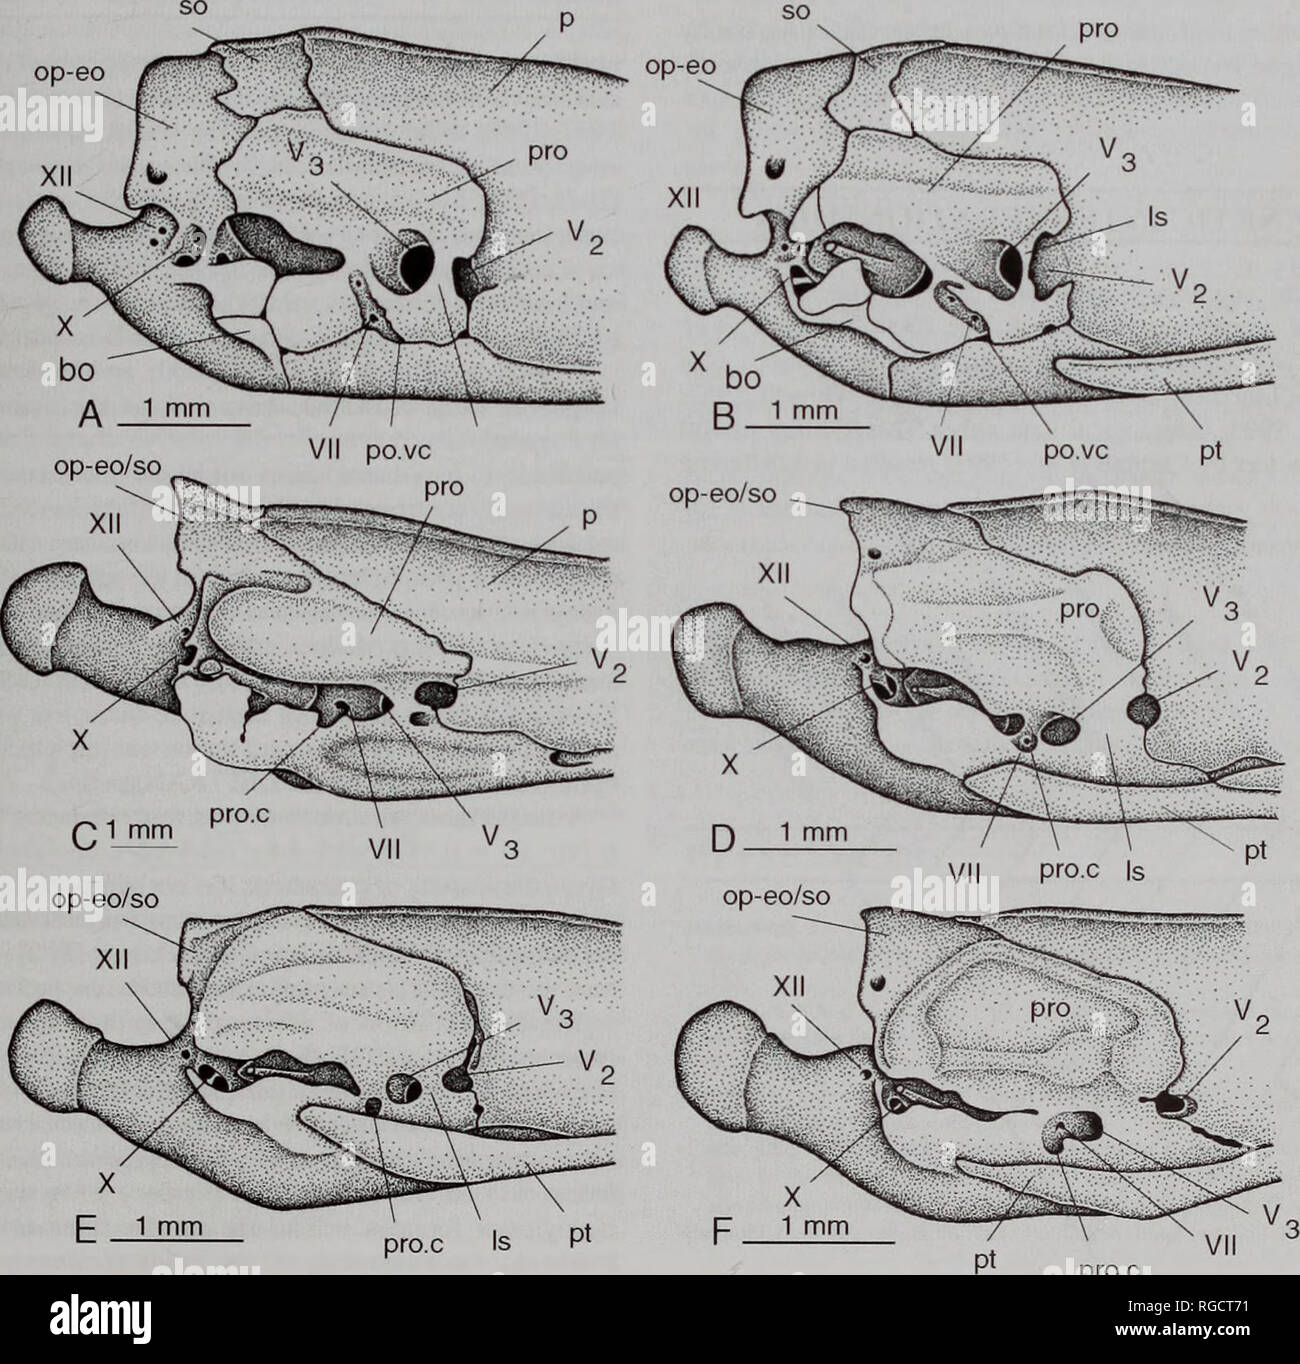 . Bulletin of the Natural History Museum Zoology. A 1 rnm R 1 mm 01 mnV Fig. 5 A-C The otico-occipital region of uropeltine snakes in dorsal views. A, Melanophidium wynaudense (BMNH 1930.5.8.124): B, Uropeltis woodmansoni (BMNH 1930.5.8.73); C, Pseudotyphlopsphilippinus (BMNH 1978.1092). op-eo. Fig. 6 A-F The otico-occipital region of uropeltine snakes in right lateral views. A, Melanophidium punctatum (BMNH 1930.5.8.119); B, Melanophidium wynaudense (BMNH 1930.5.8.124); C, Pseudotyphlops philippinus (BMNH 1978.1092); D, Uropeltis woodmansoni (BMNH 1930.5.8.73); E, Rhinophis drummondhayi (BMNH Stock Photo